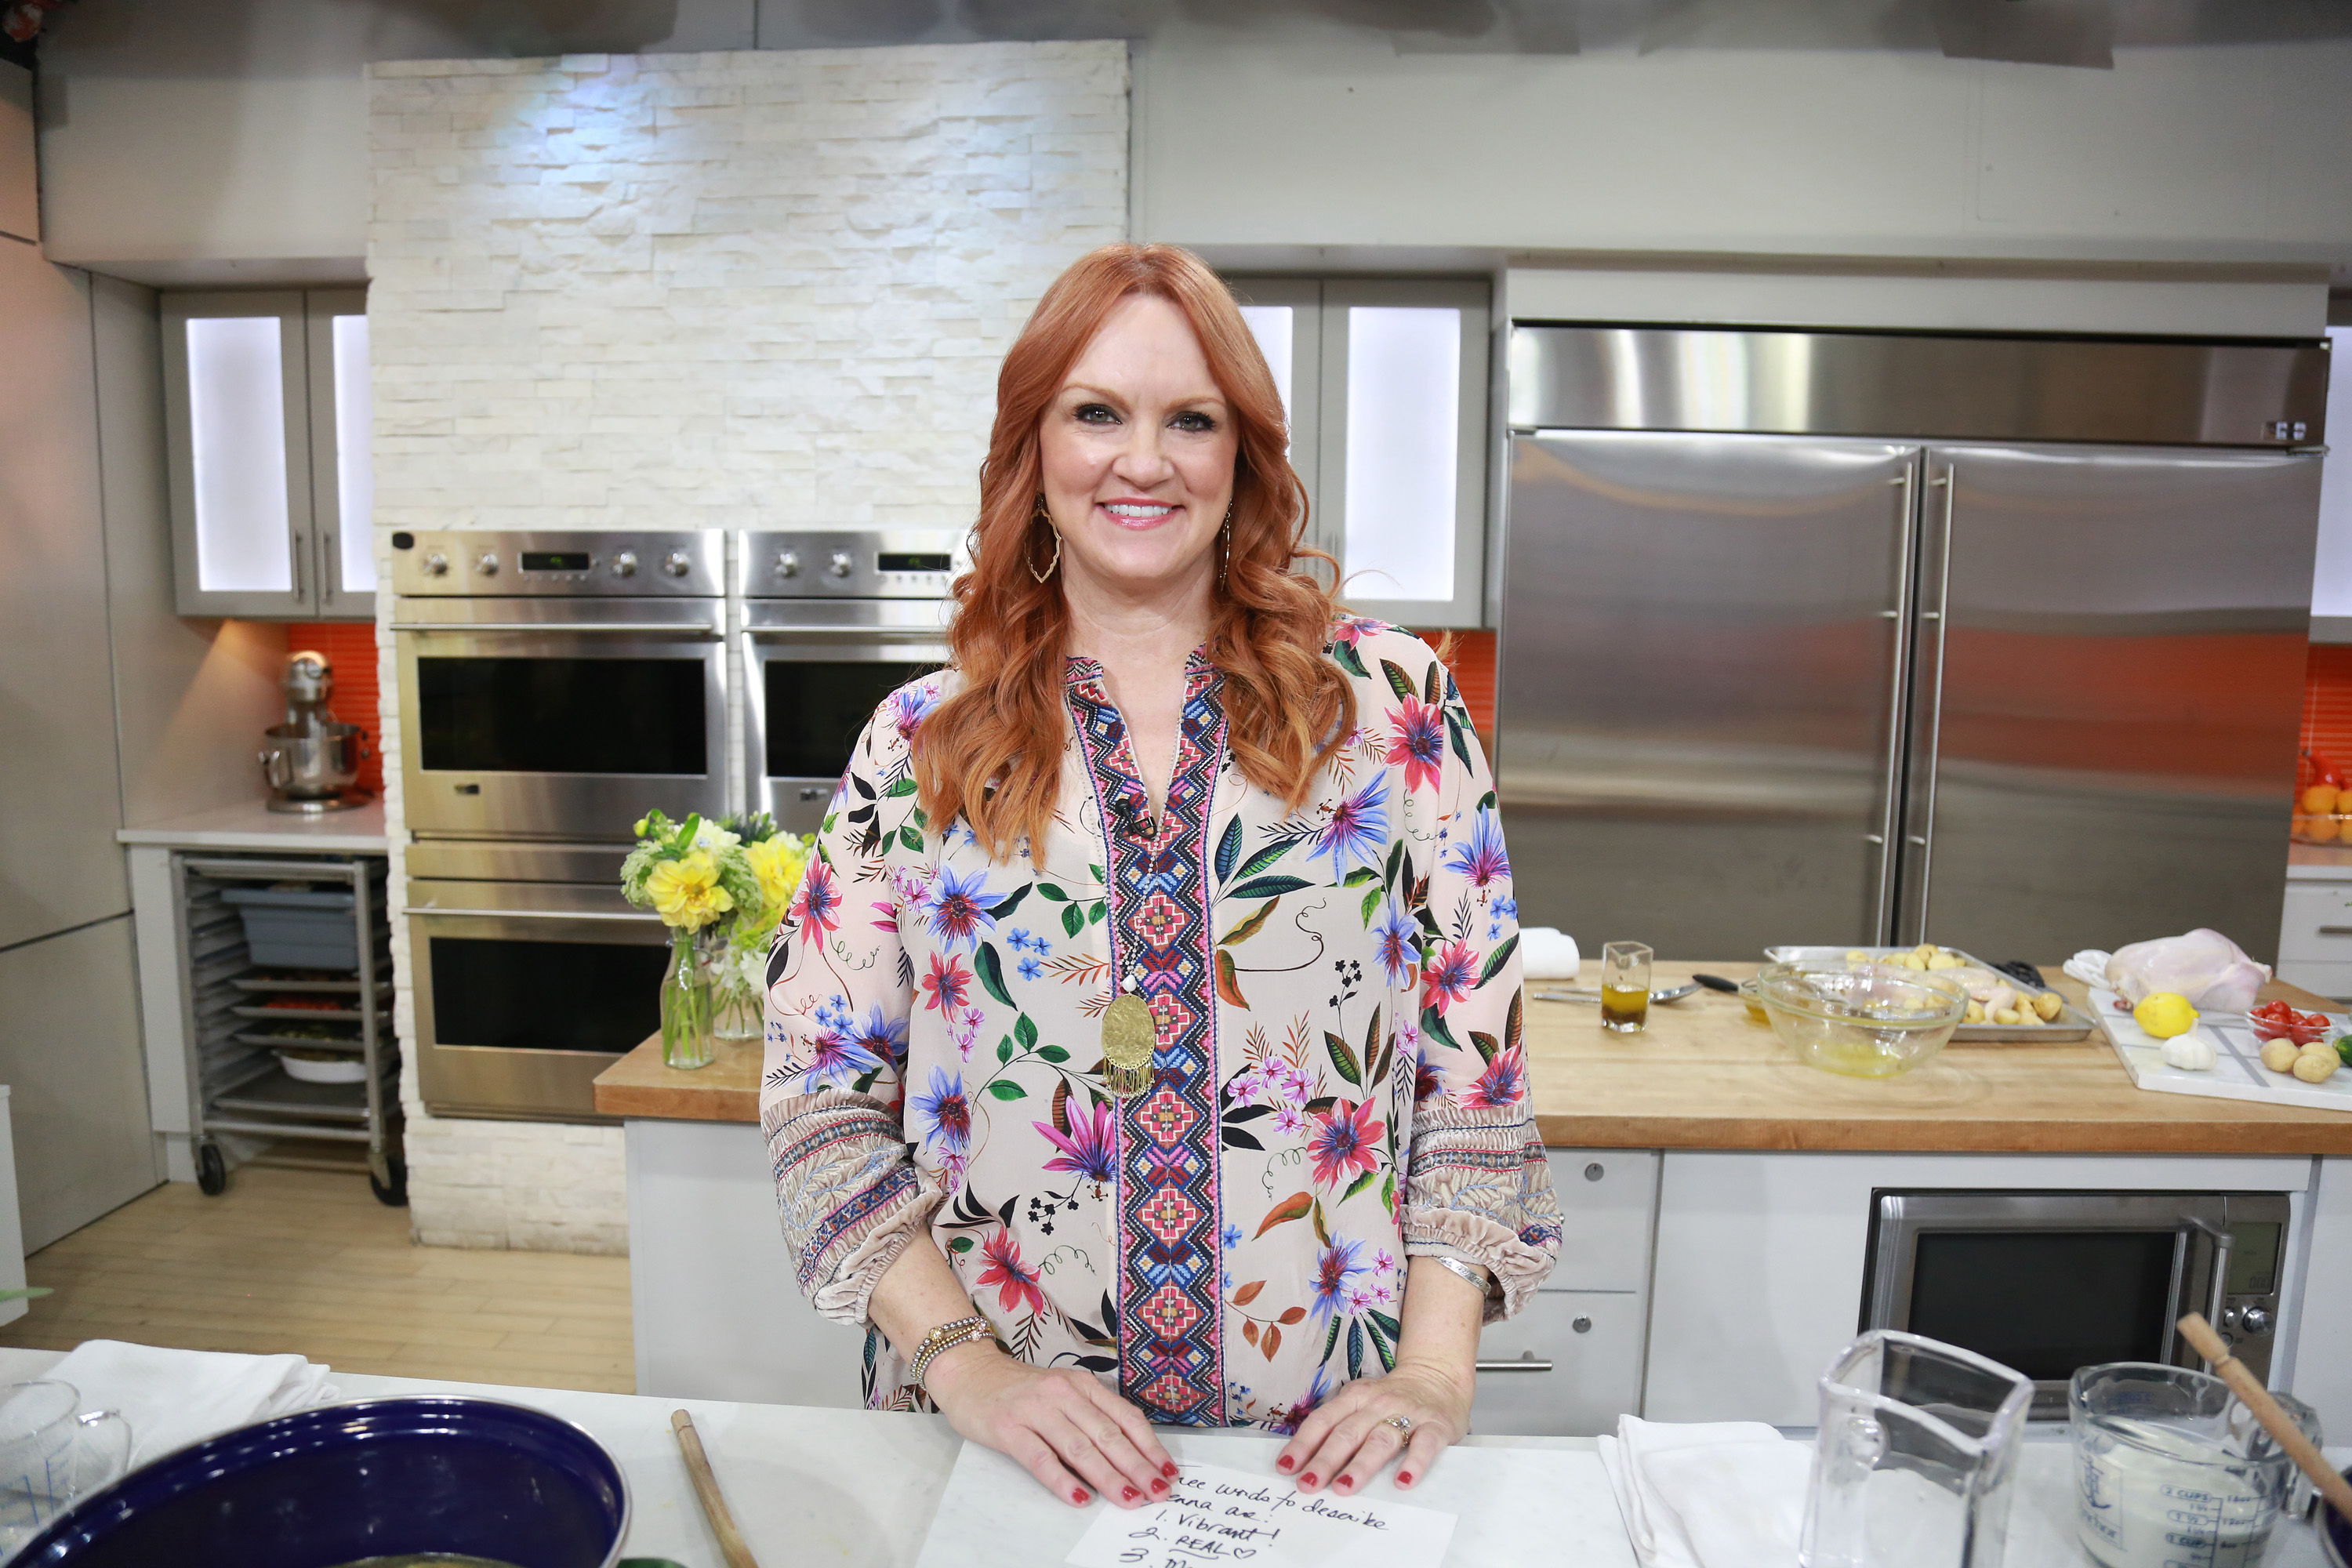 'The Pioneer Woman' star Ree Drummond stands at a counter in a brightly shirt during an appearance on the 'Today' show